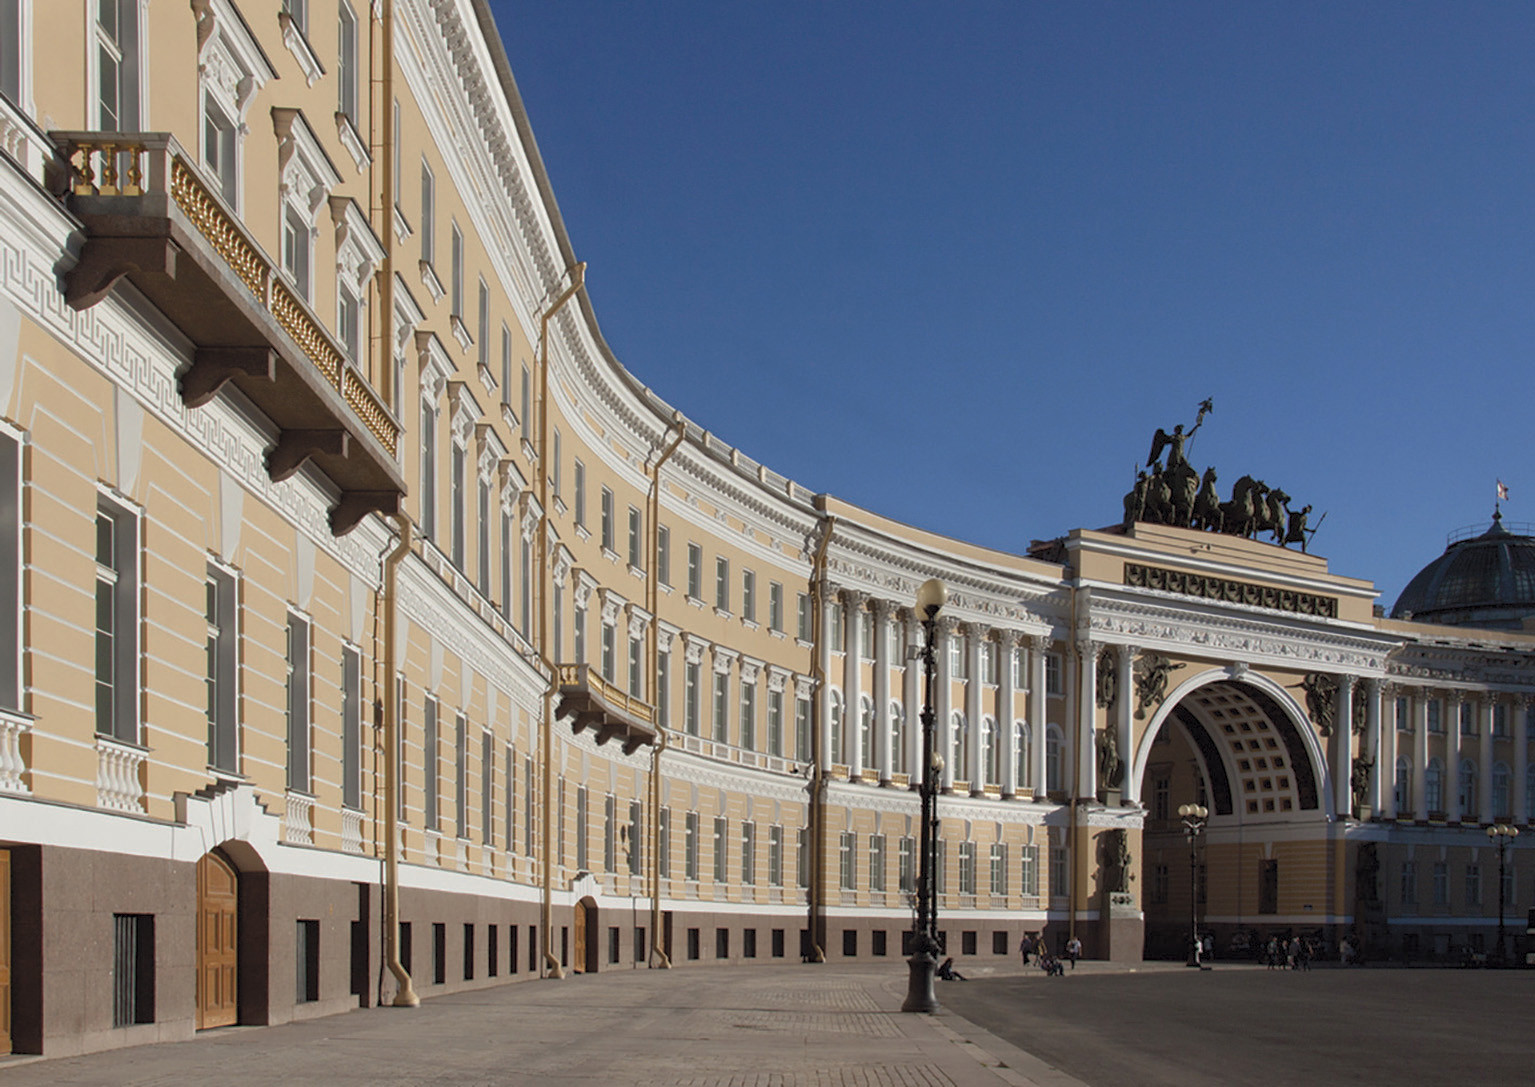 The Glavny Stab (General Staff Building), in St Petersburg's Winter Palace Square, now houses part of the Hermitage Museum's collections.©